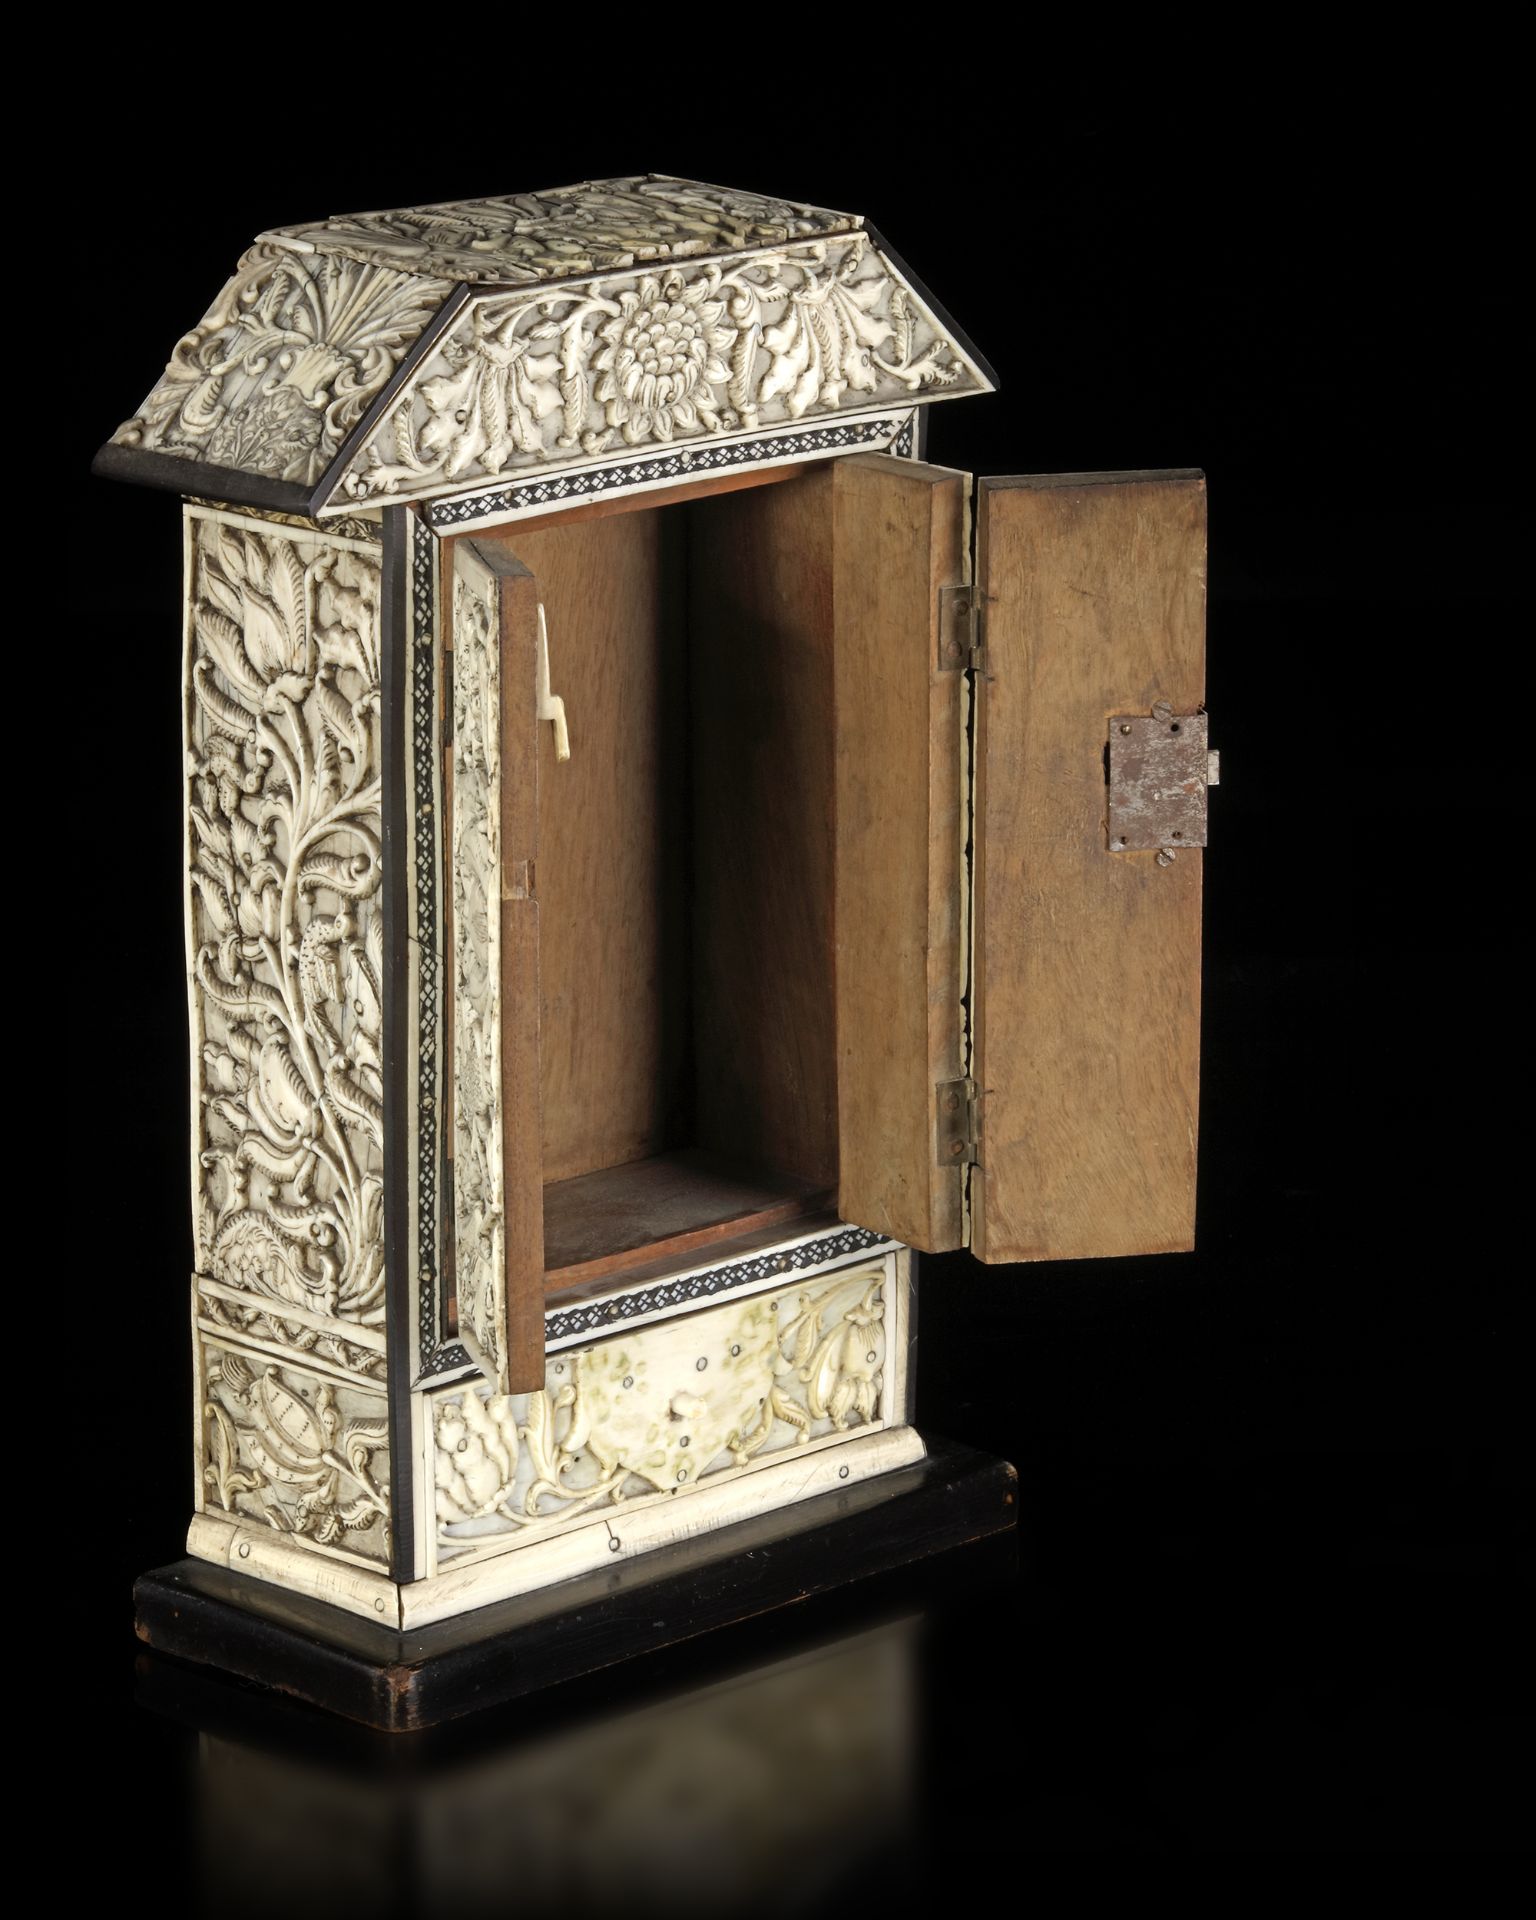 AN IVORY-VENEERED WOODED CABINET, SRI LANKA OR INDIA, LATE 17TH CENTURY - Image 4 of 6